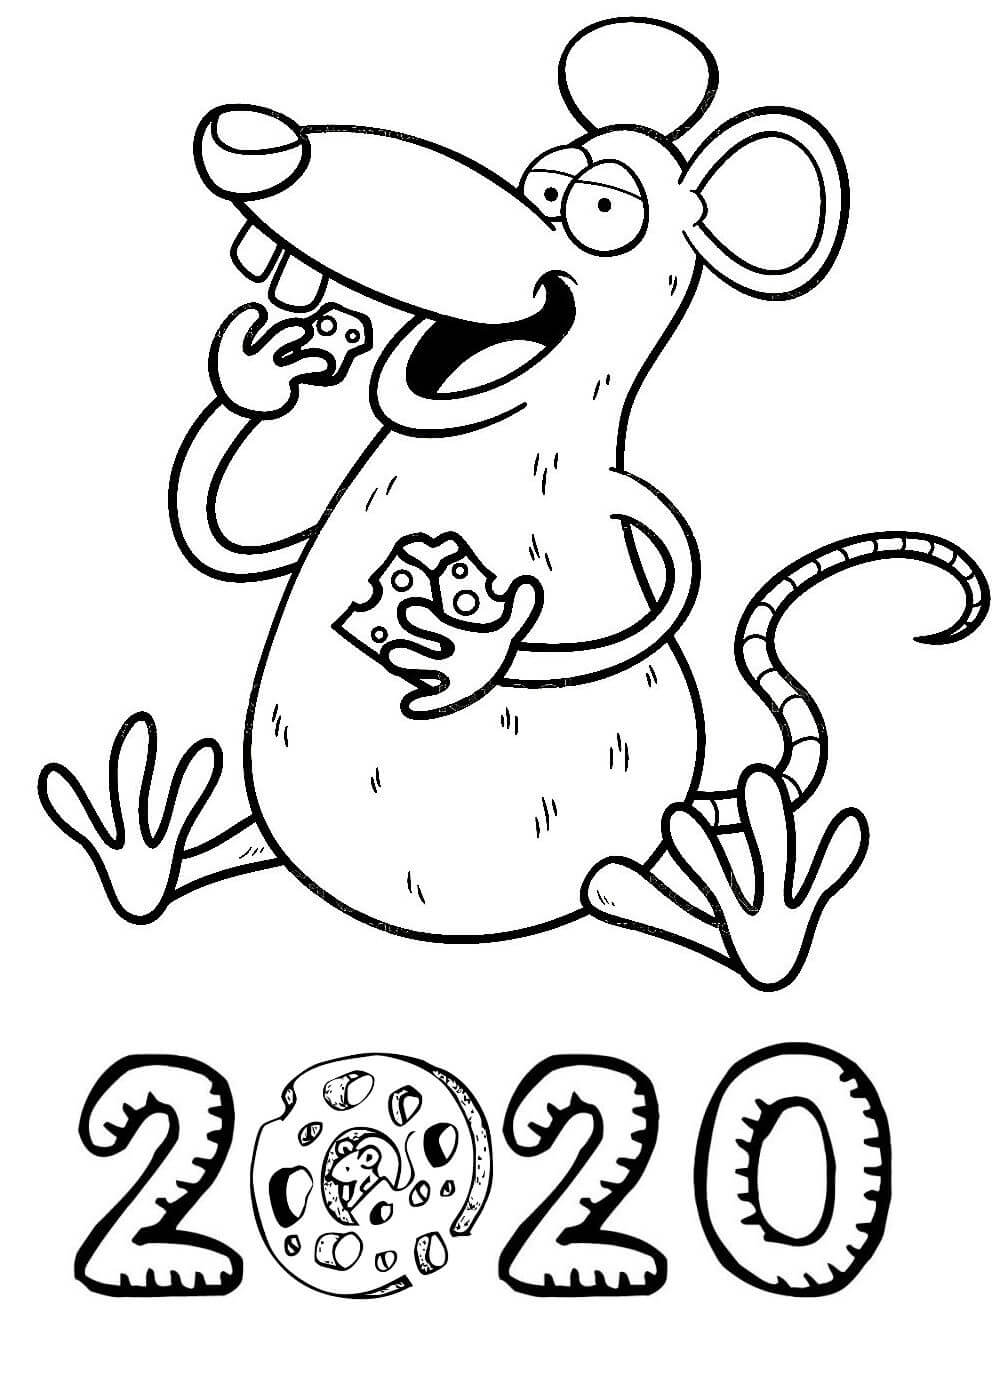 2020 Coloring Sheet Coloring Pages